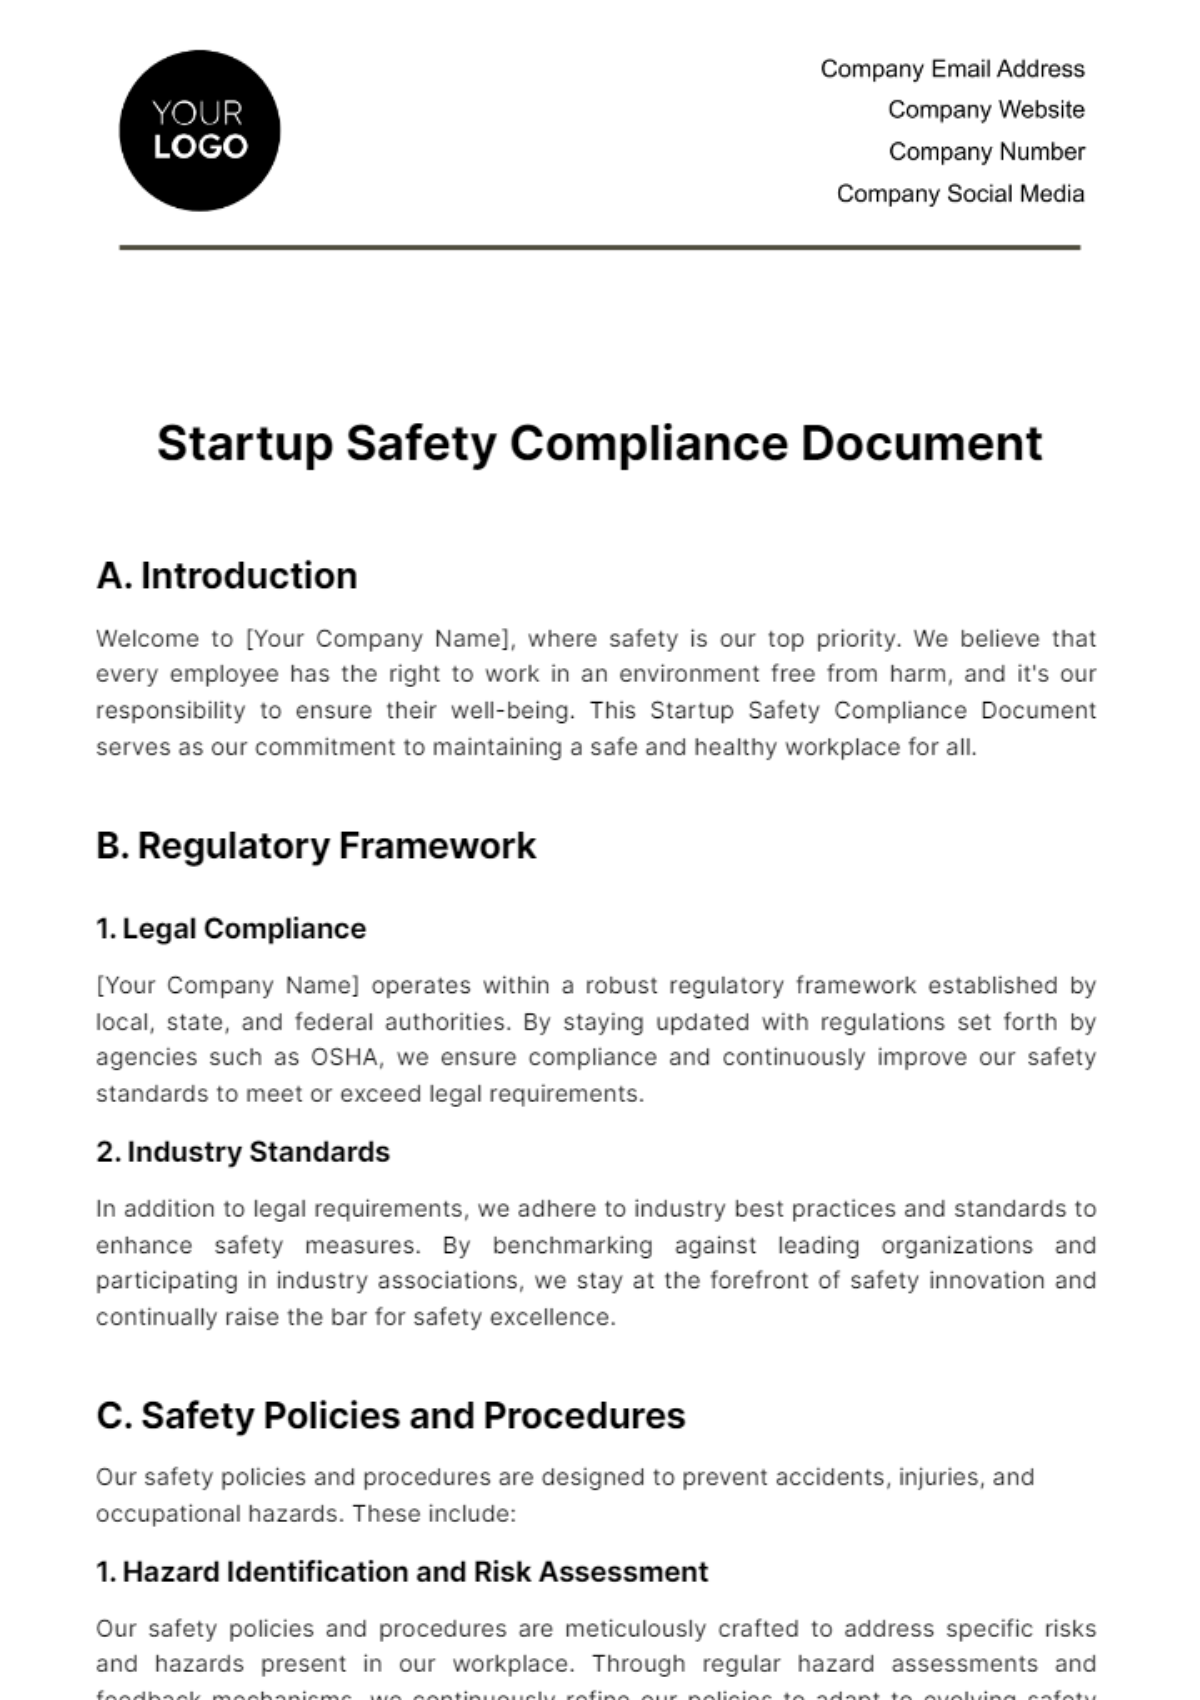 Free Startup Safety Compliance Document Template